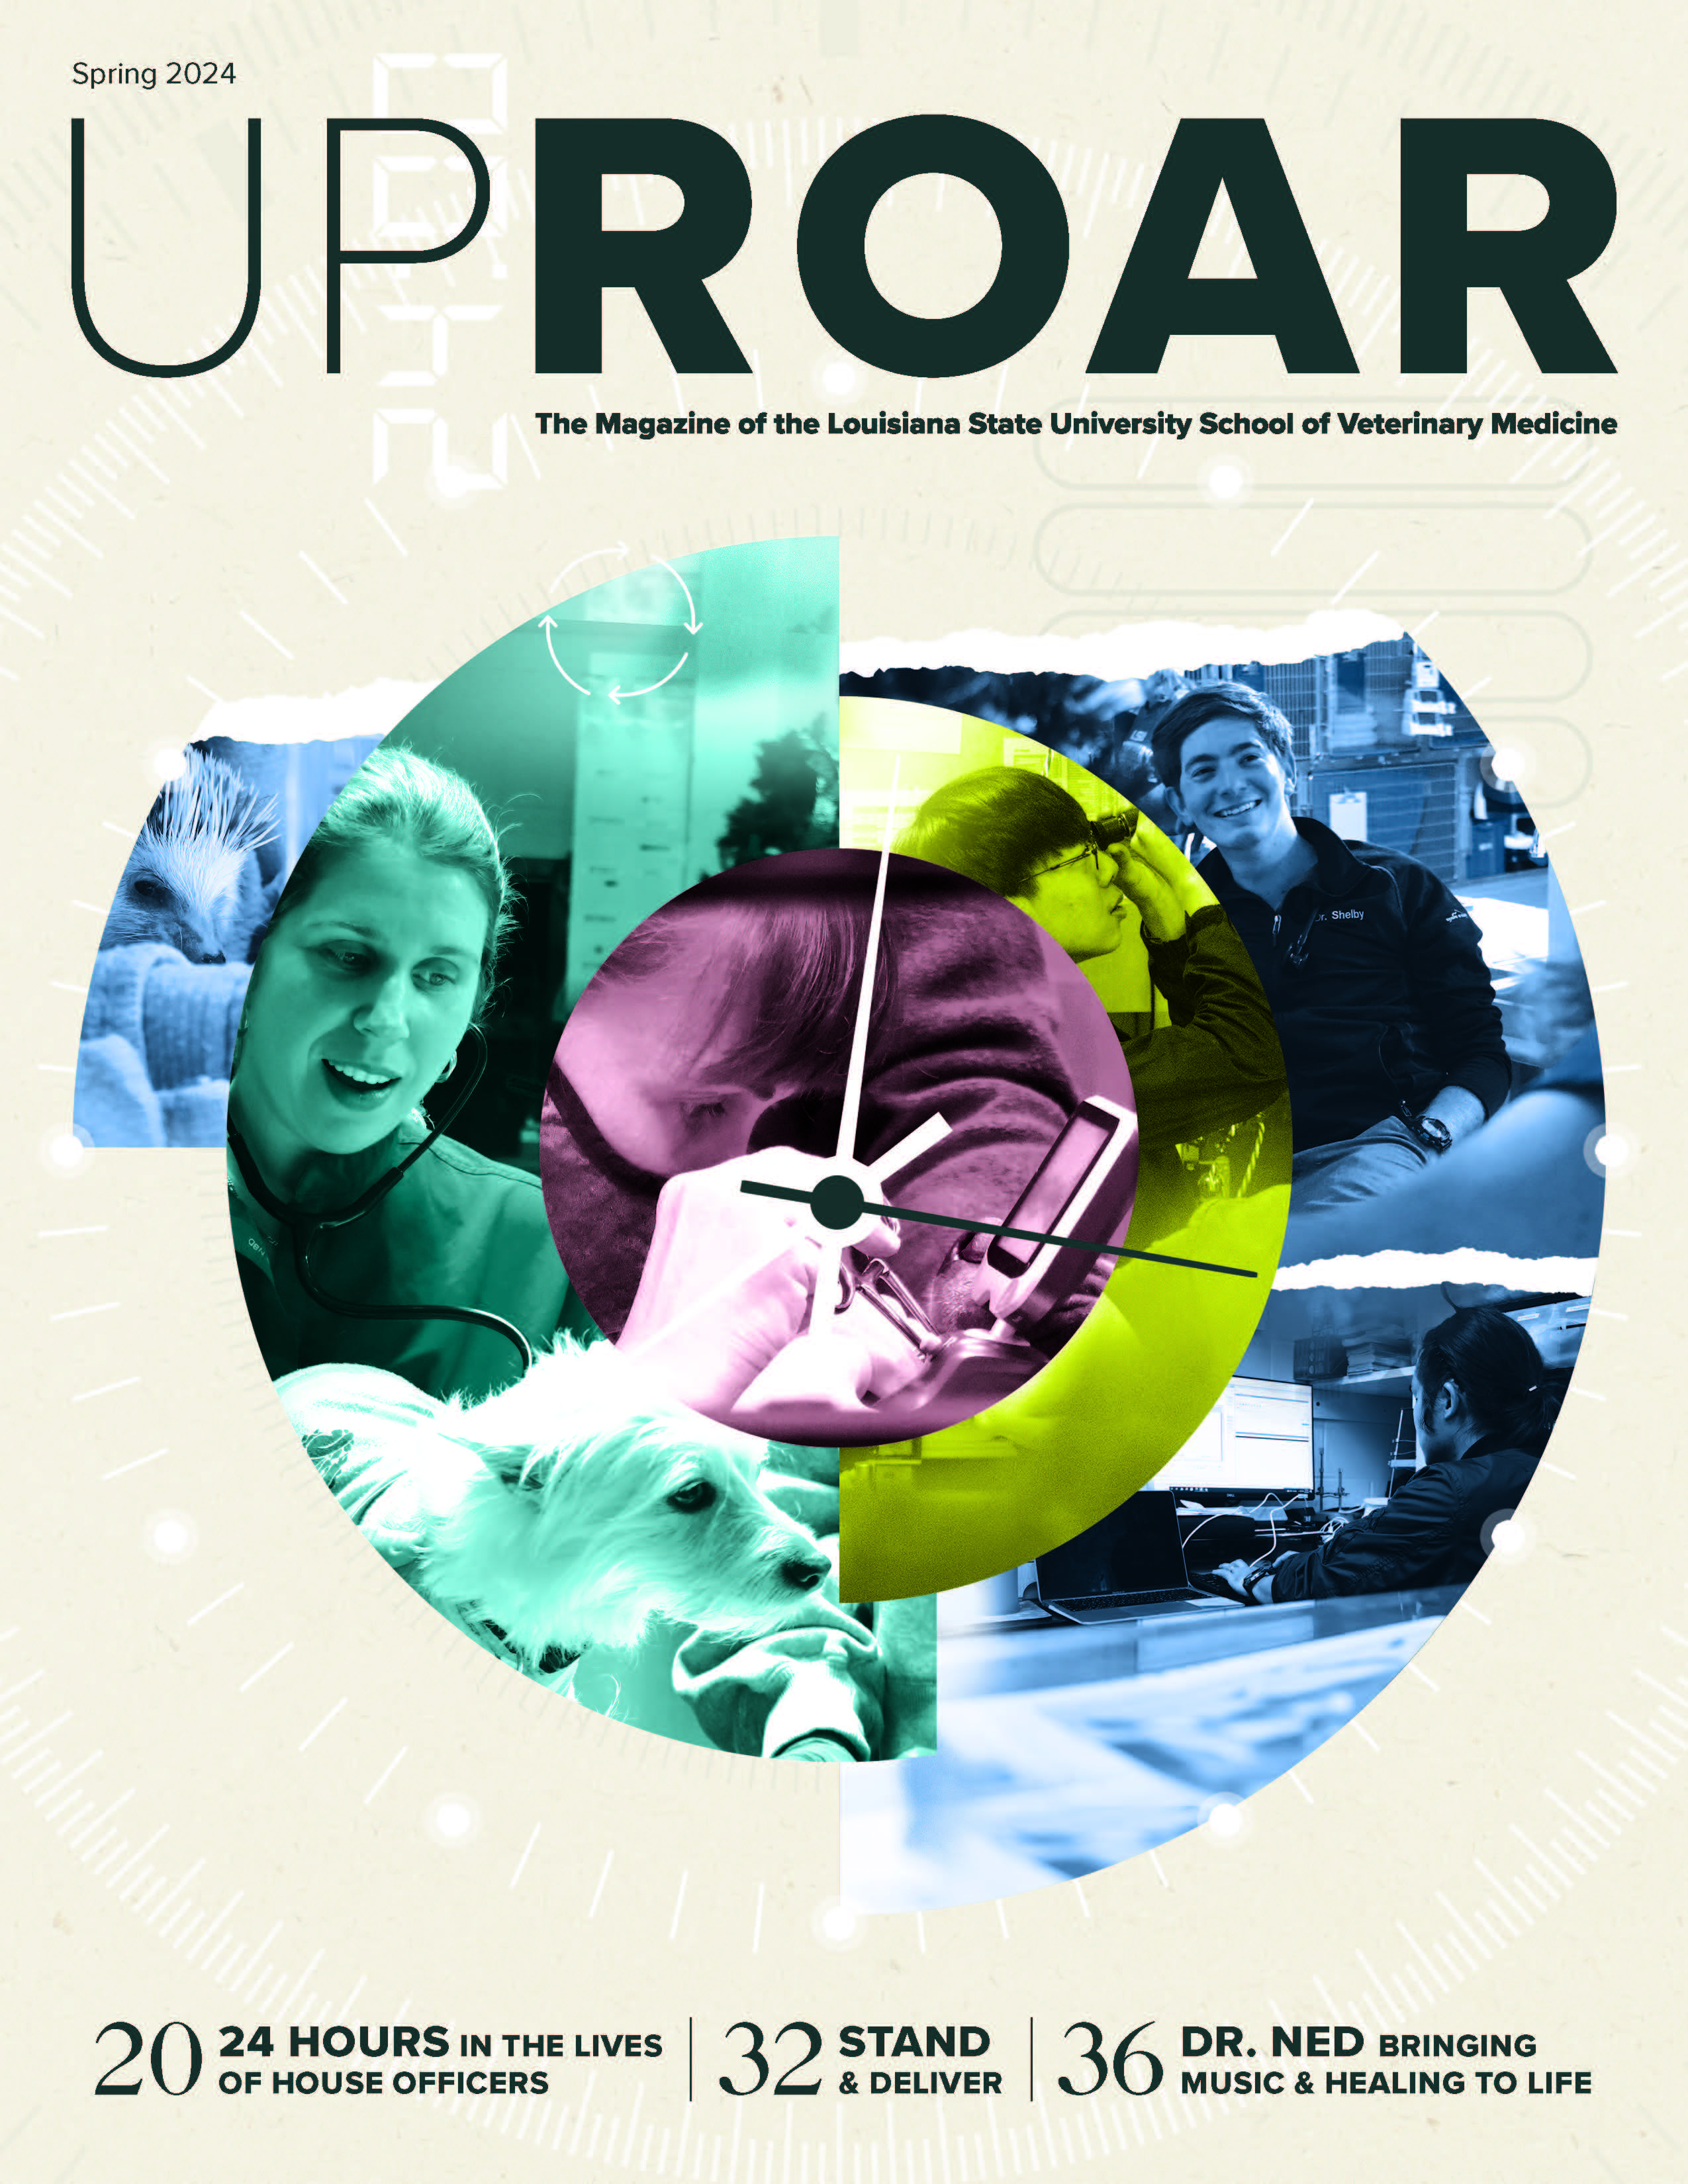 Spring 2024 Uproar cover